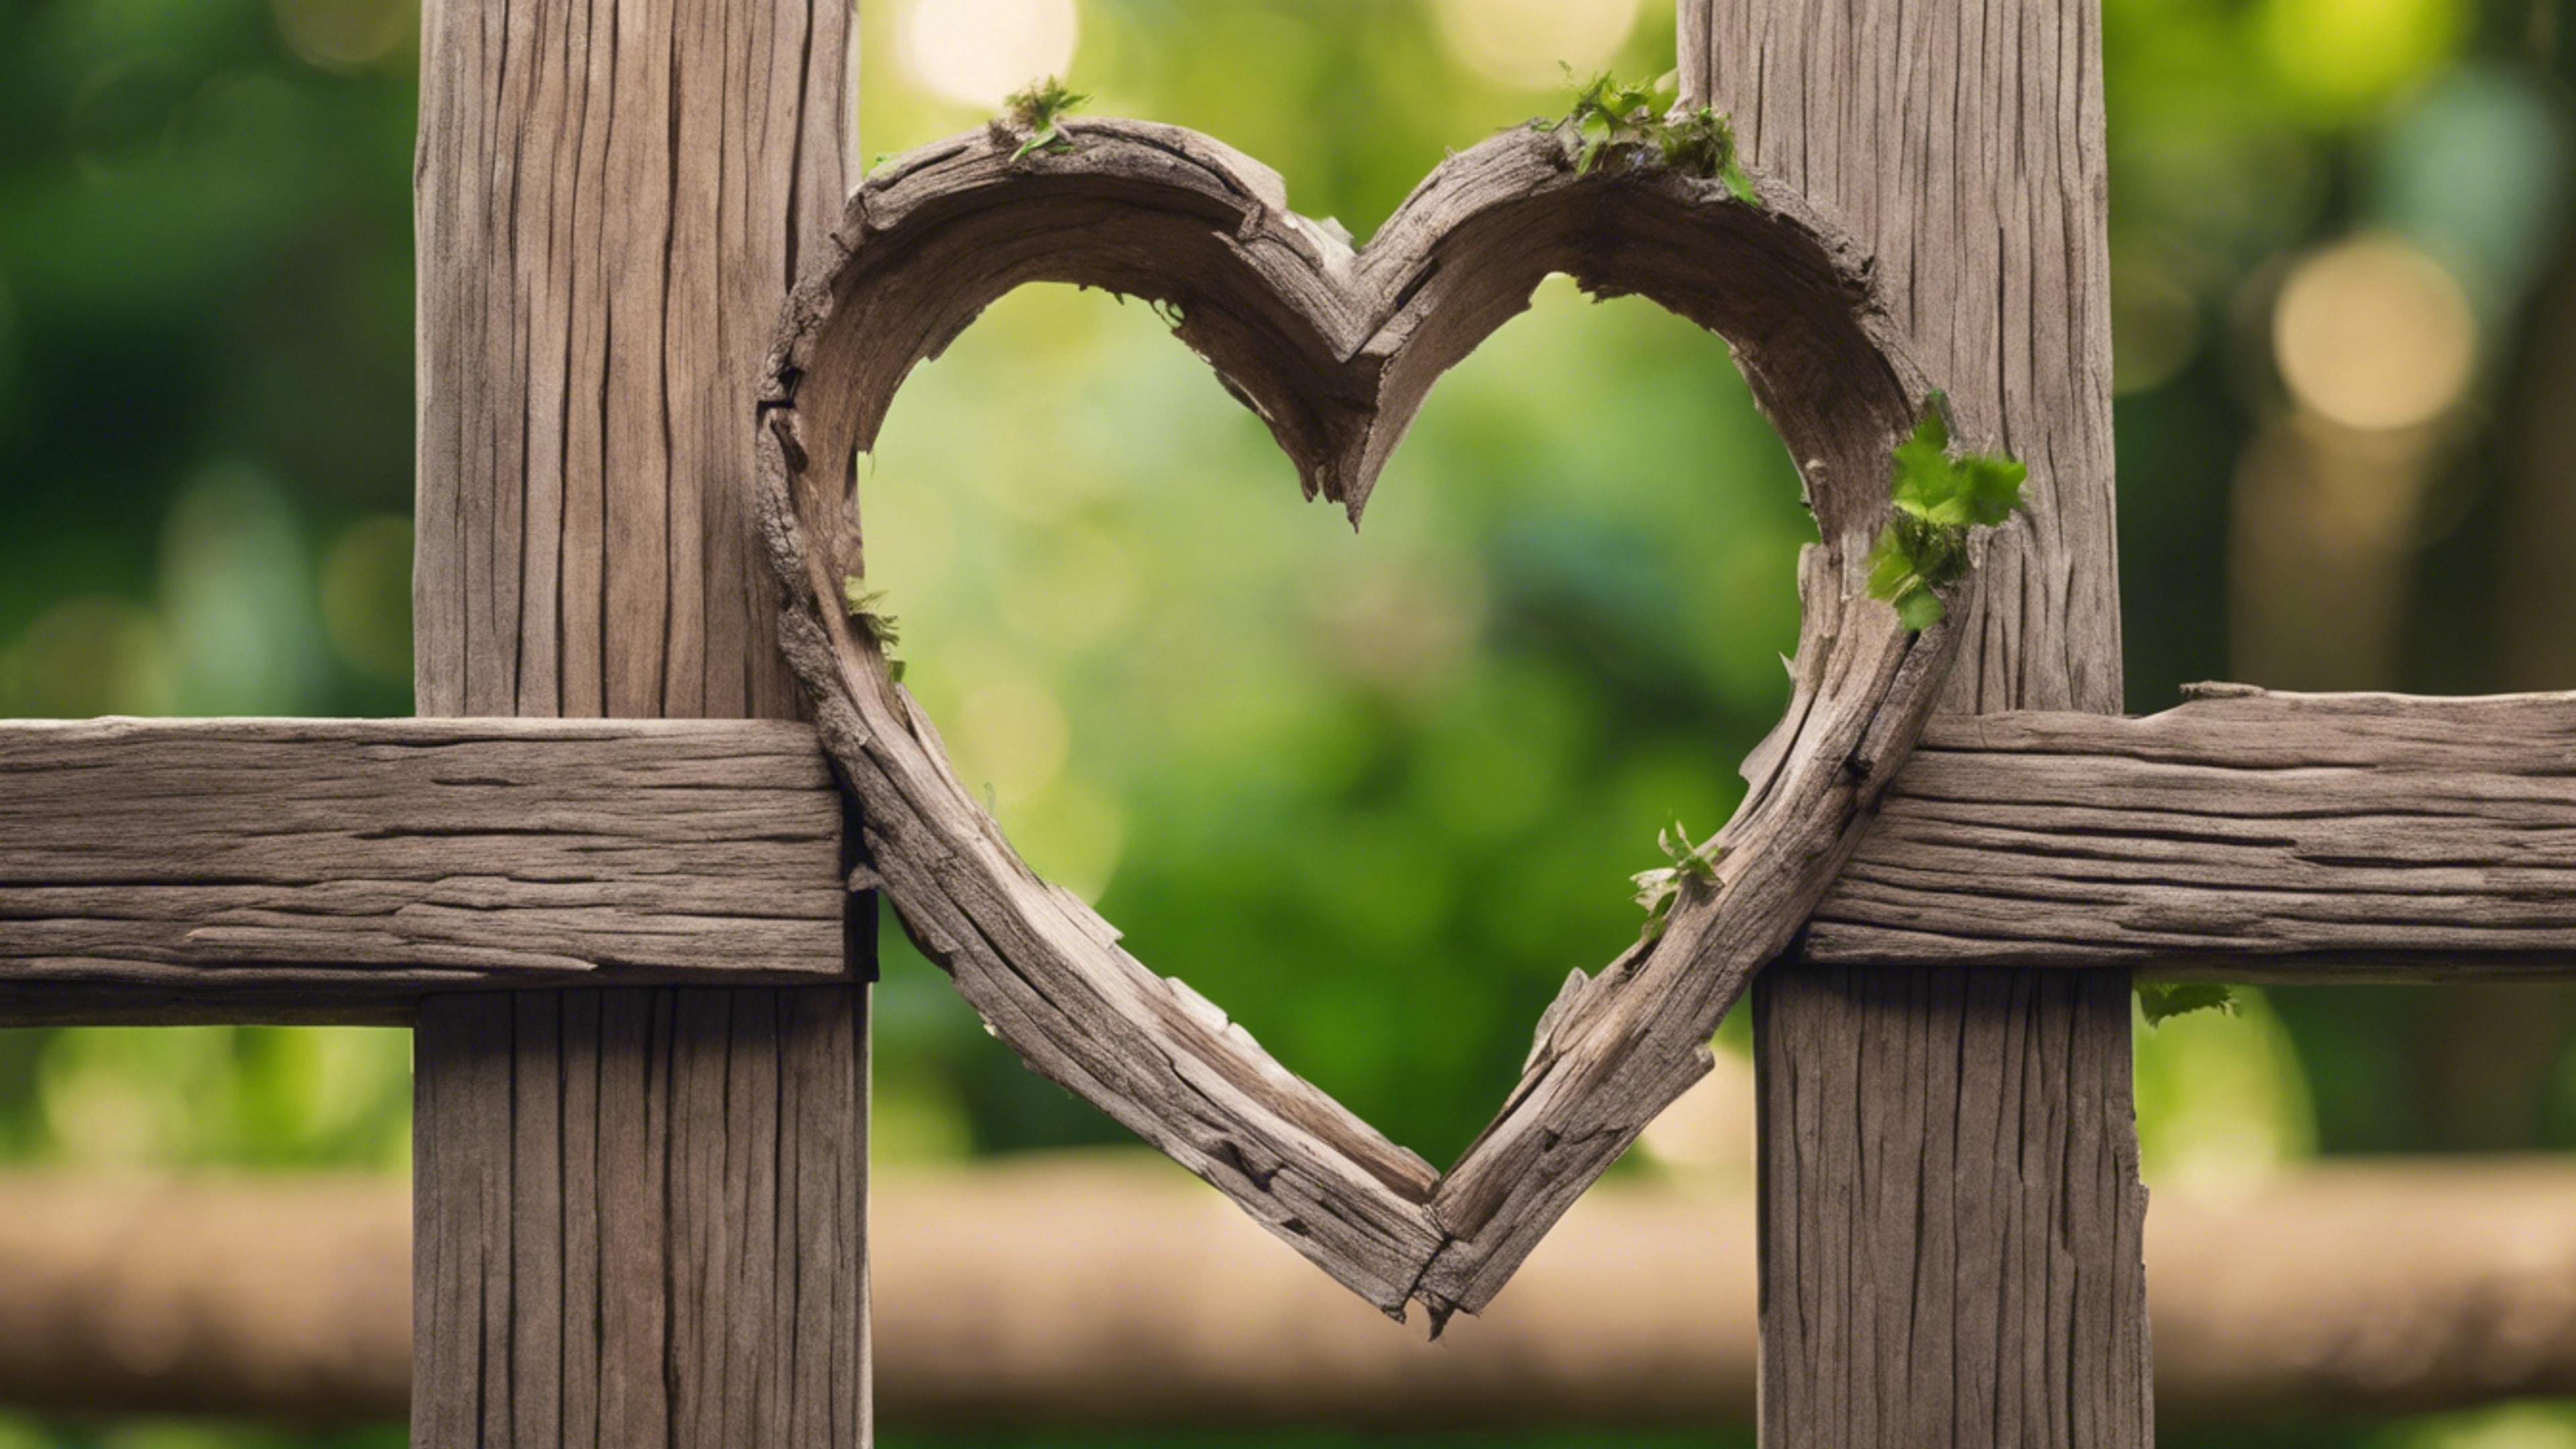 A heart-shaped hole in a brown wooden fence, with a lush green garden peeking through.壁紙[54f91736c23f447cbd20]